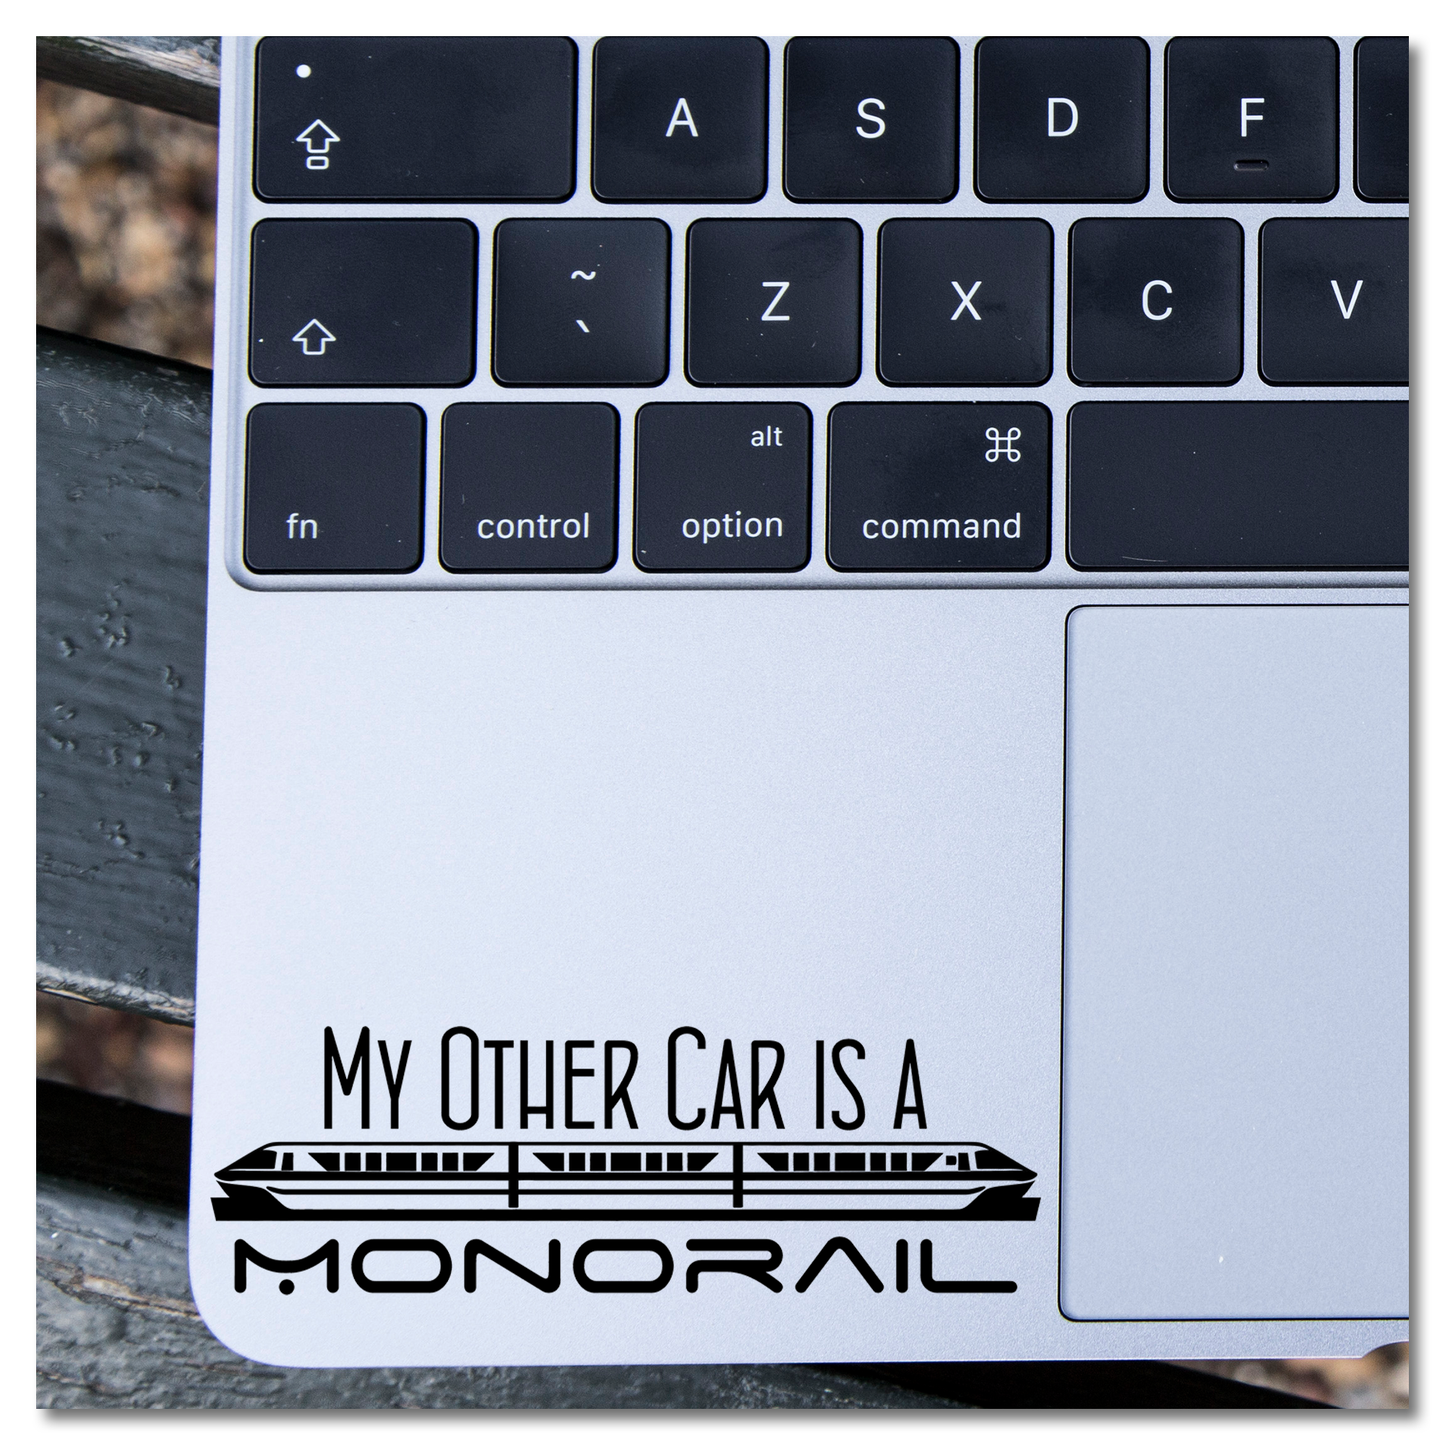 My Other Car Is A Monorail Vinyl Decal Sticker